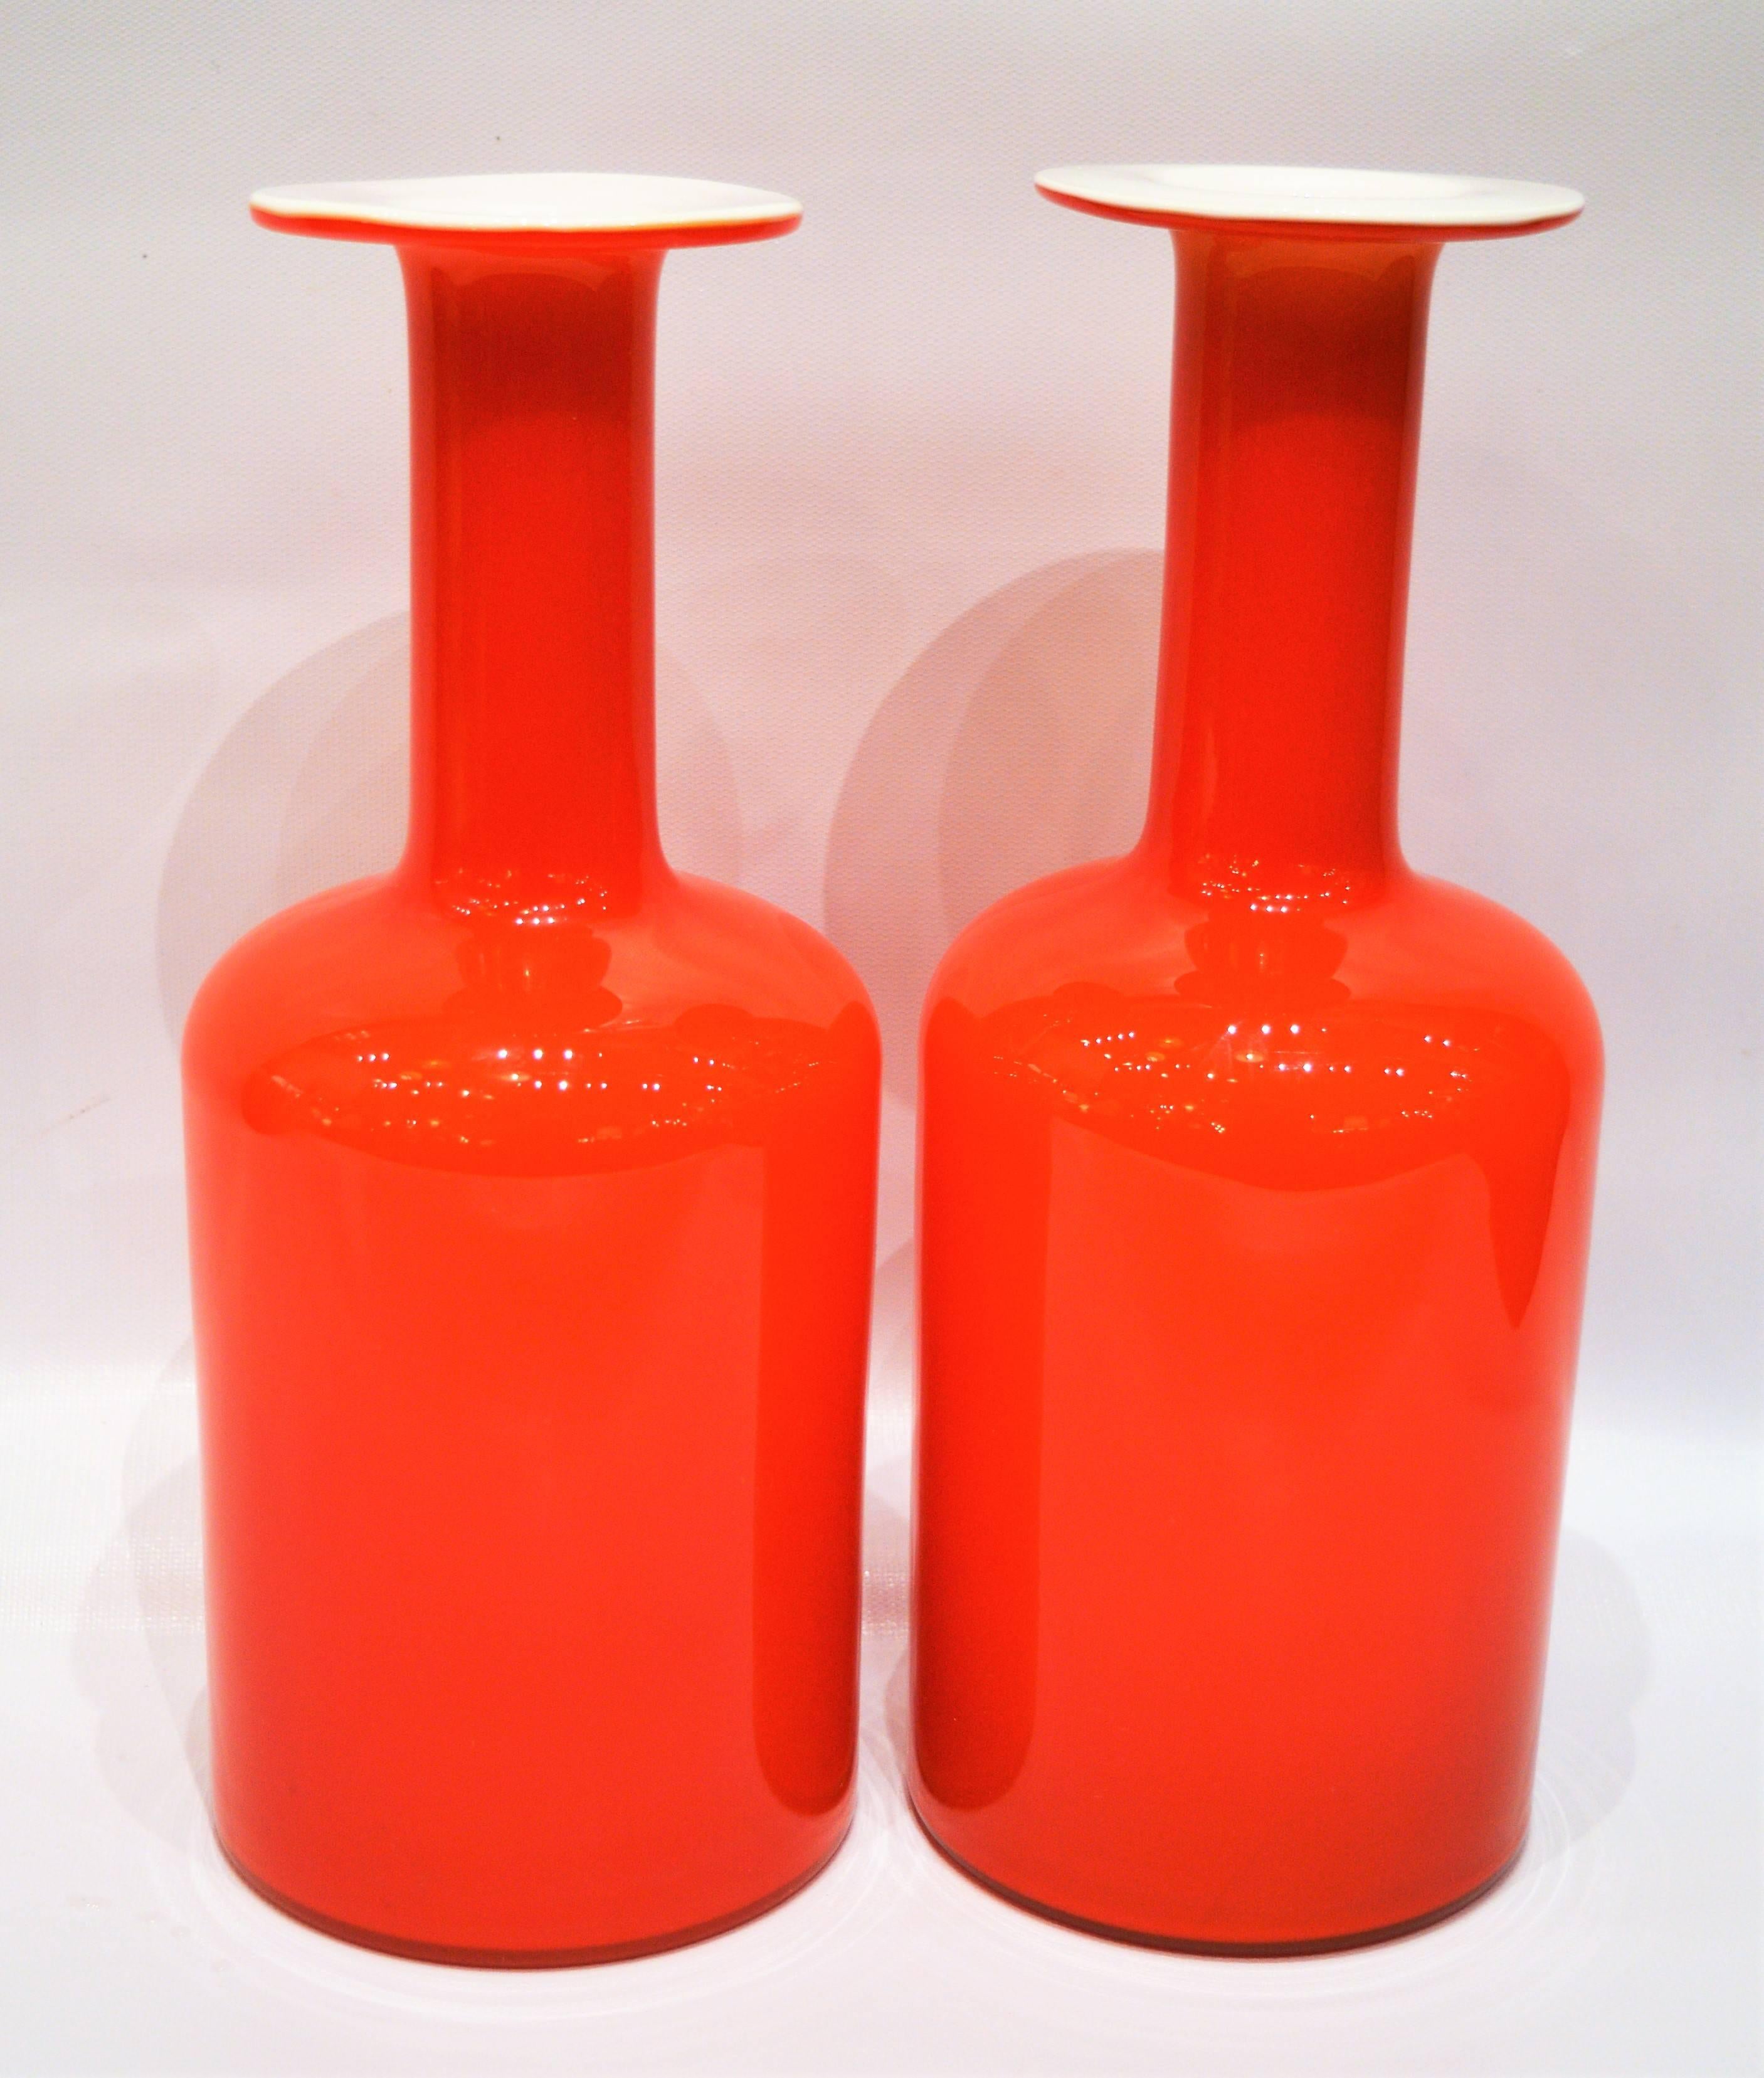 These iconic Danish modern handblown art glass vases are in the most delicious shade of tomato orange that will be a gorgeous pop of color in your decor. Designed by Otto Brauer for Holmegaard, they are in excellent condition with no chips, cracks